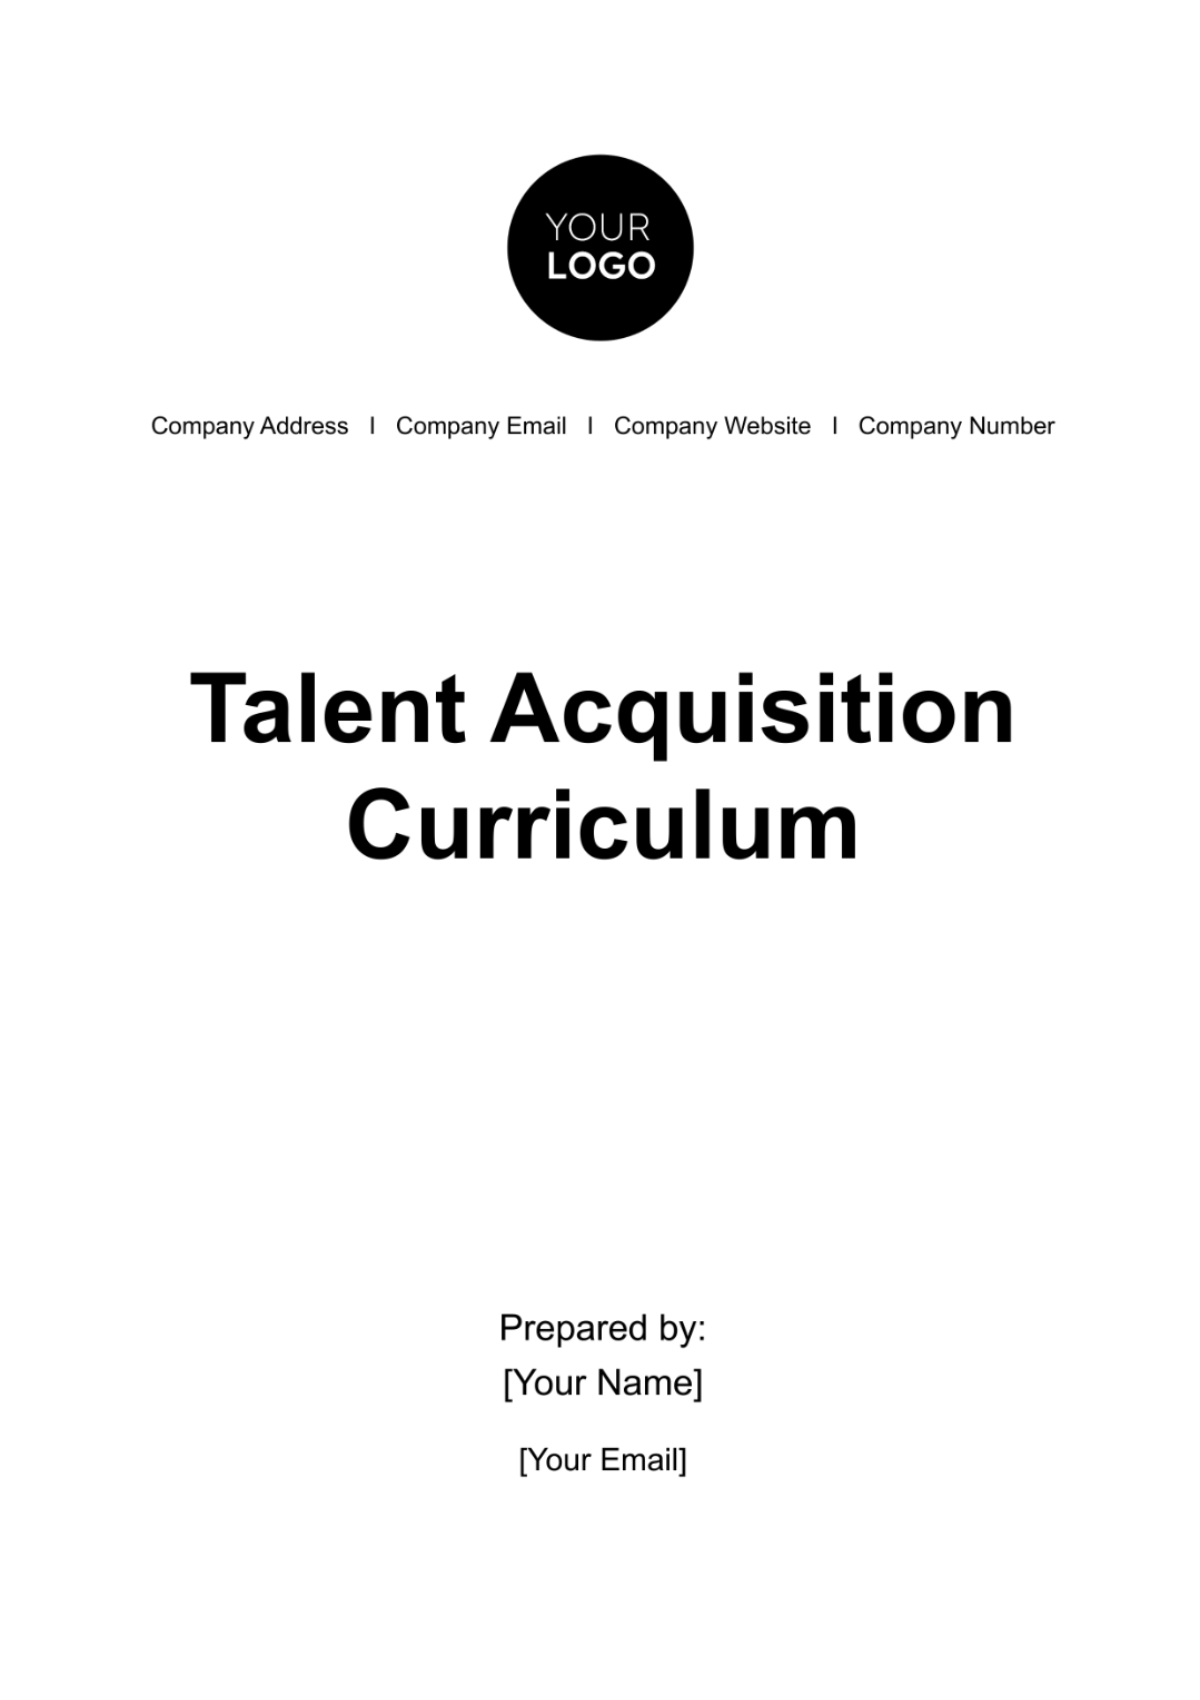 Free Talent Acquisition Curriculum HR Template